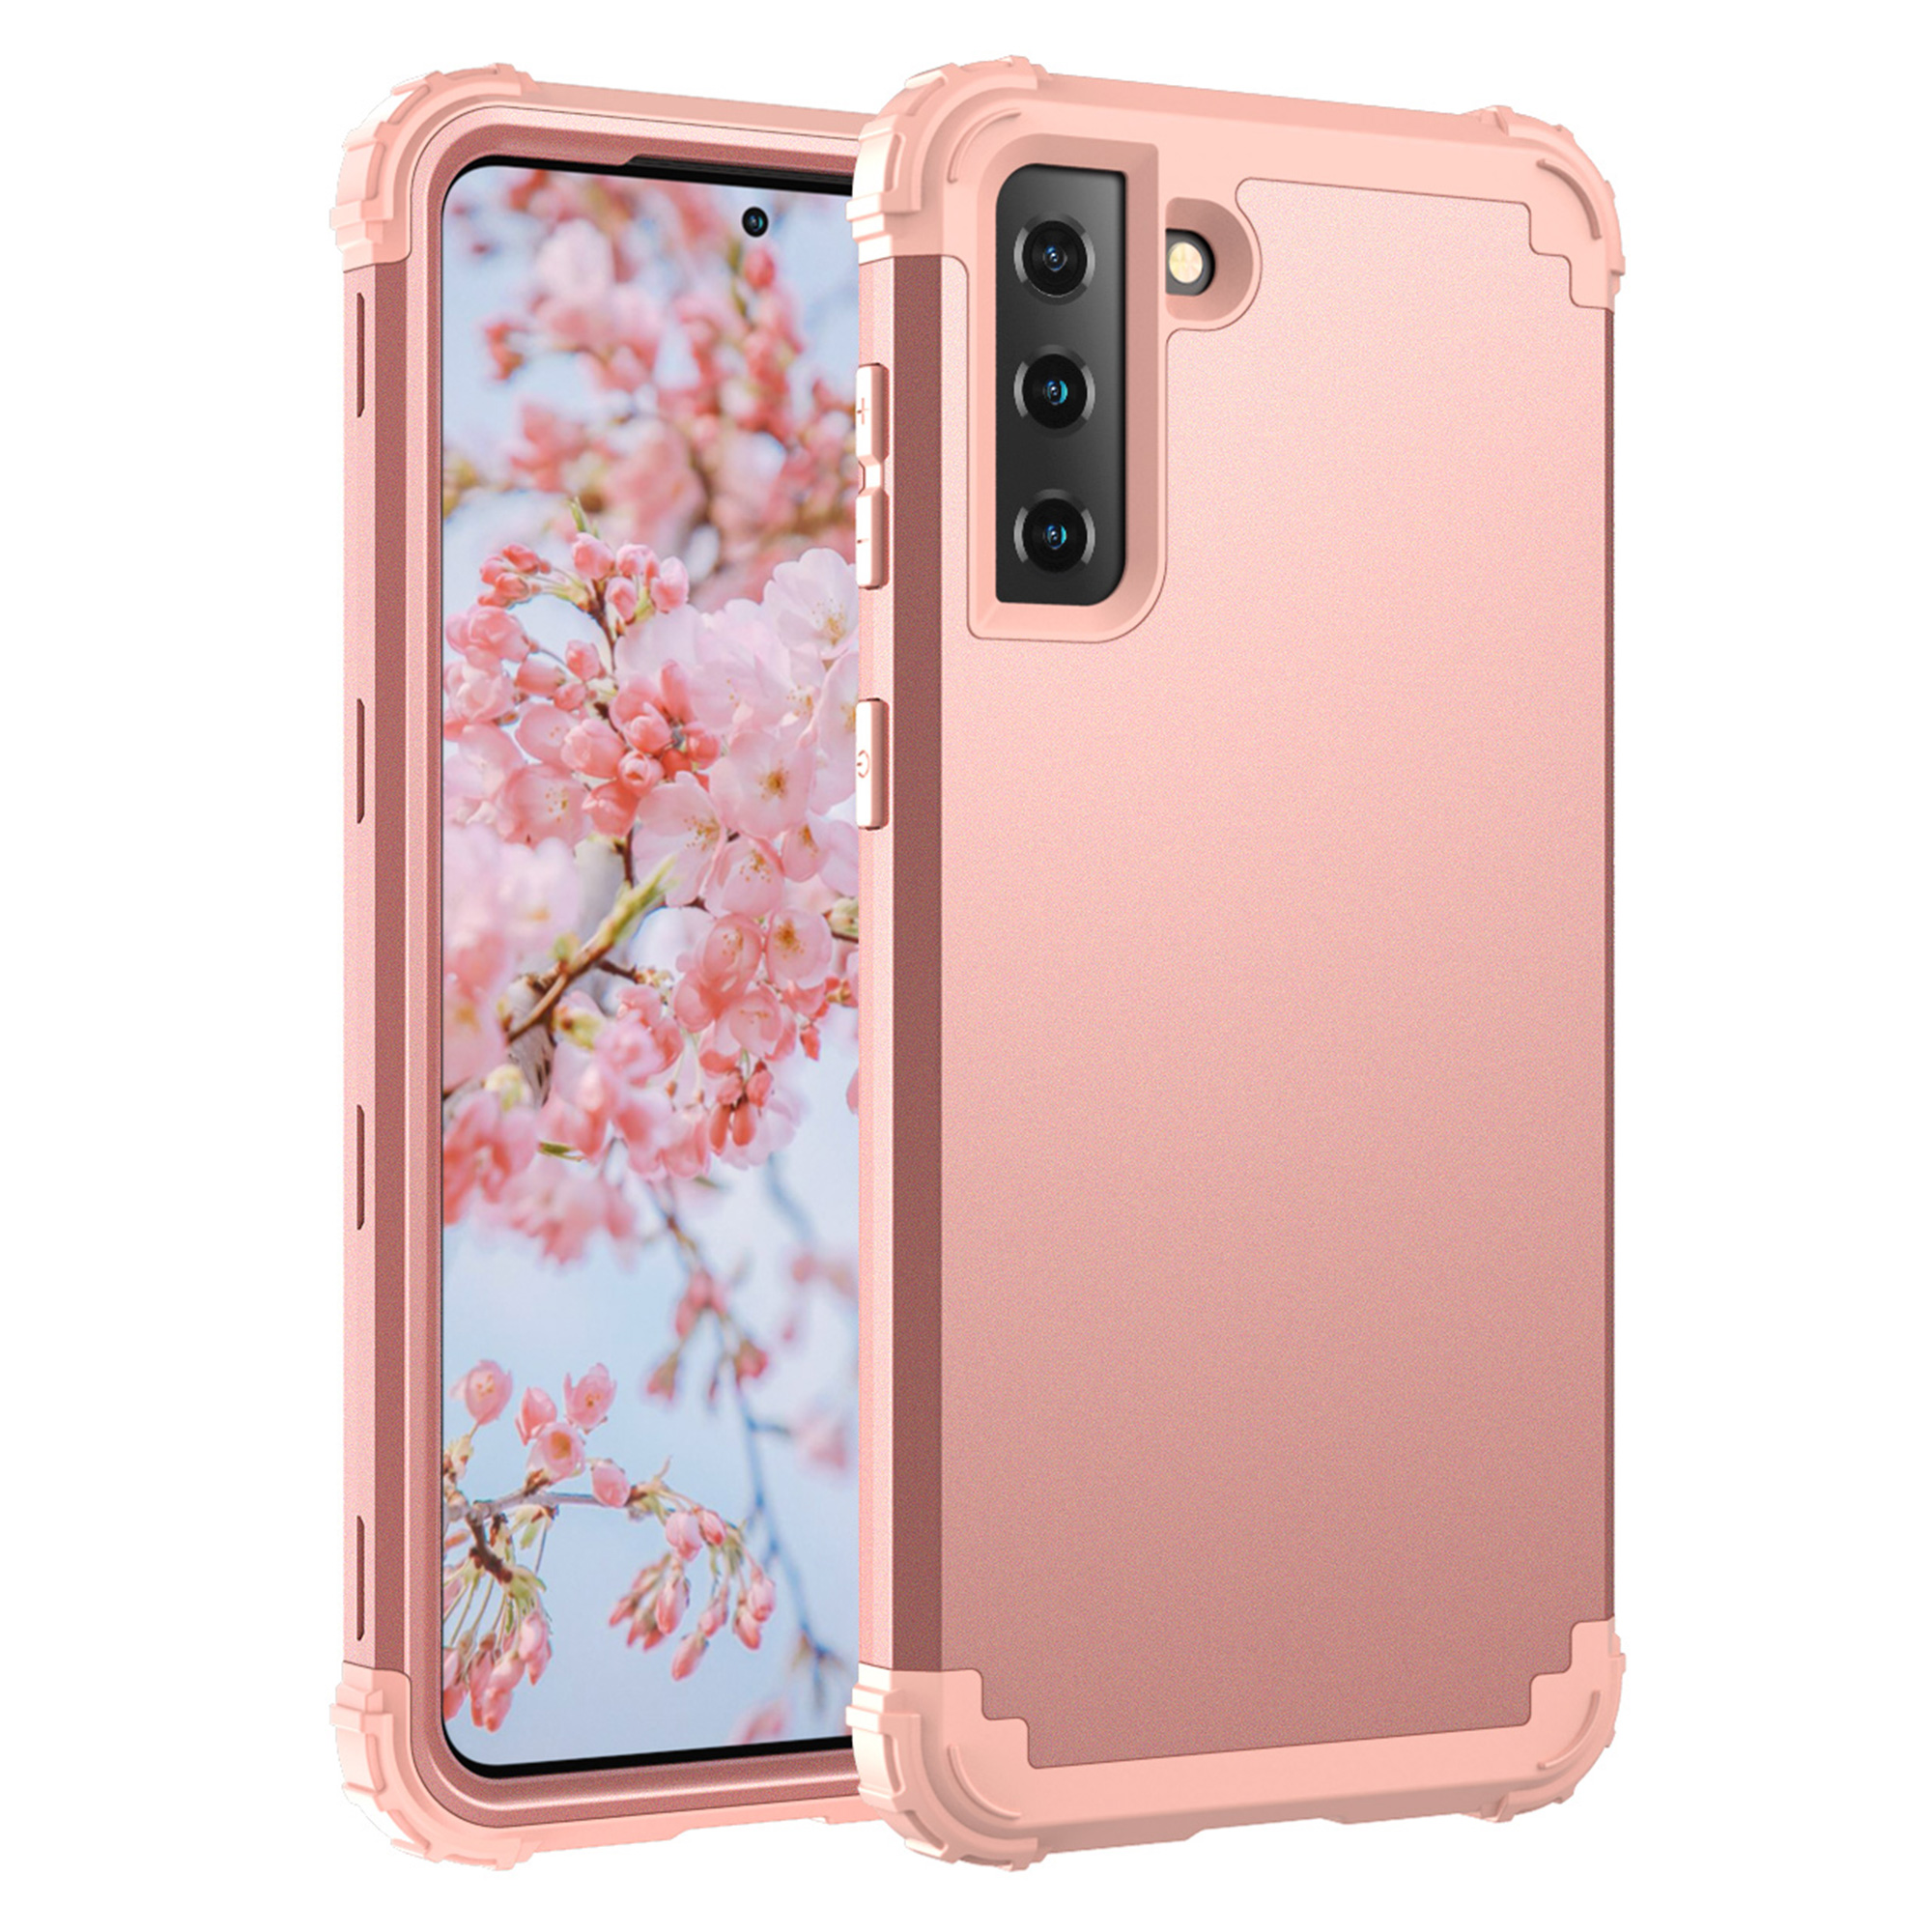 Samsung Galaxy S21+ Case, Dteck Heavy Hybrid Rugged Shockproof Case, Support Wireless Charging, 3 in 1 Full Protective Cover for Samsung Galaxy S21+/S21 Plus 5G, Rosegold - image 1 of 7